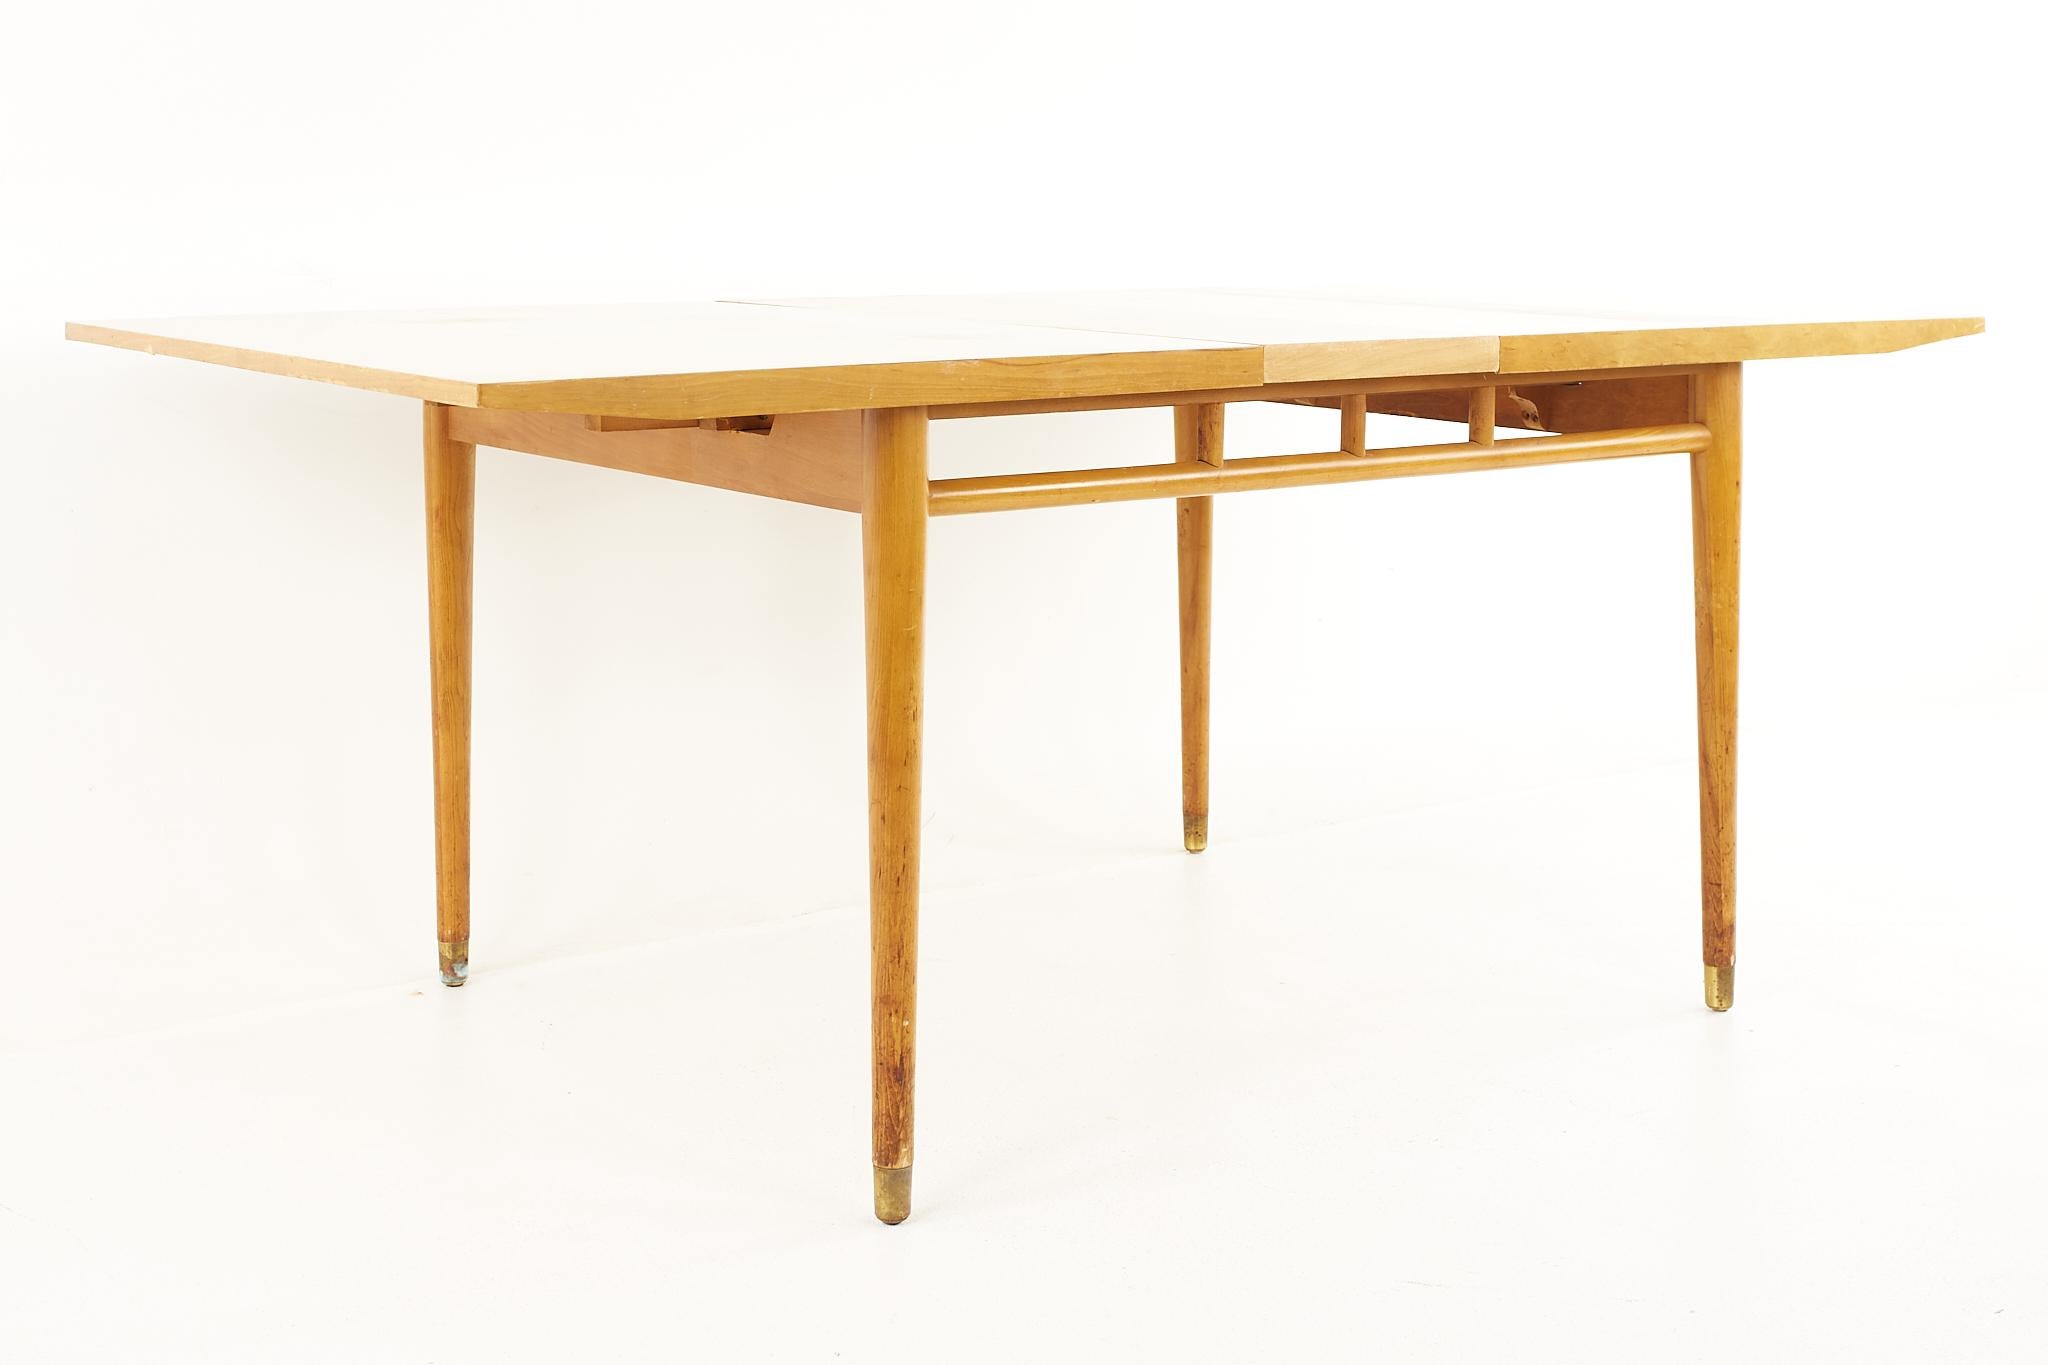 Late 20th Century Milo Baughman for Drexel Todays Living Mid Century Dining Table with 3 Leaves